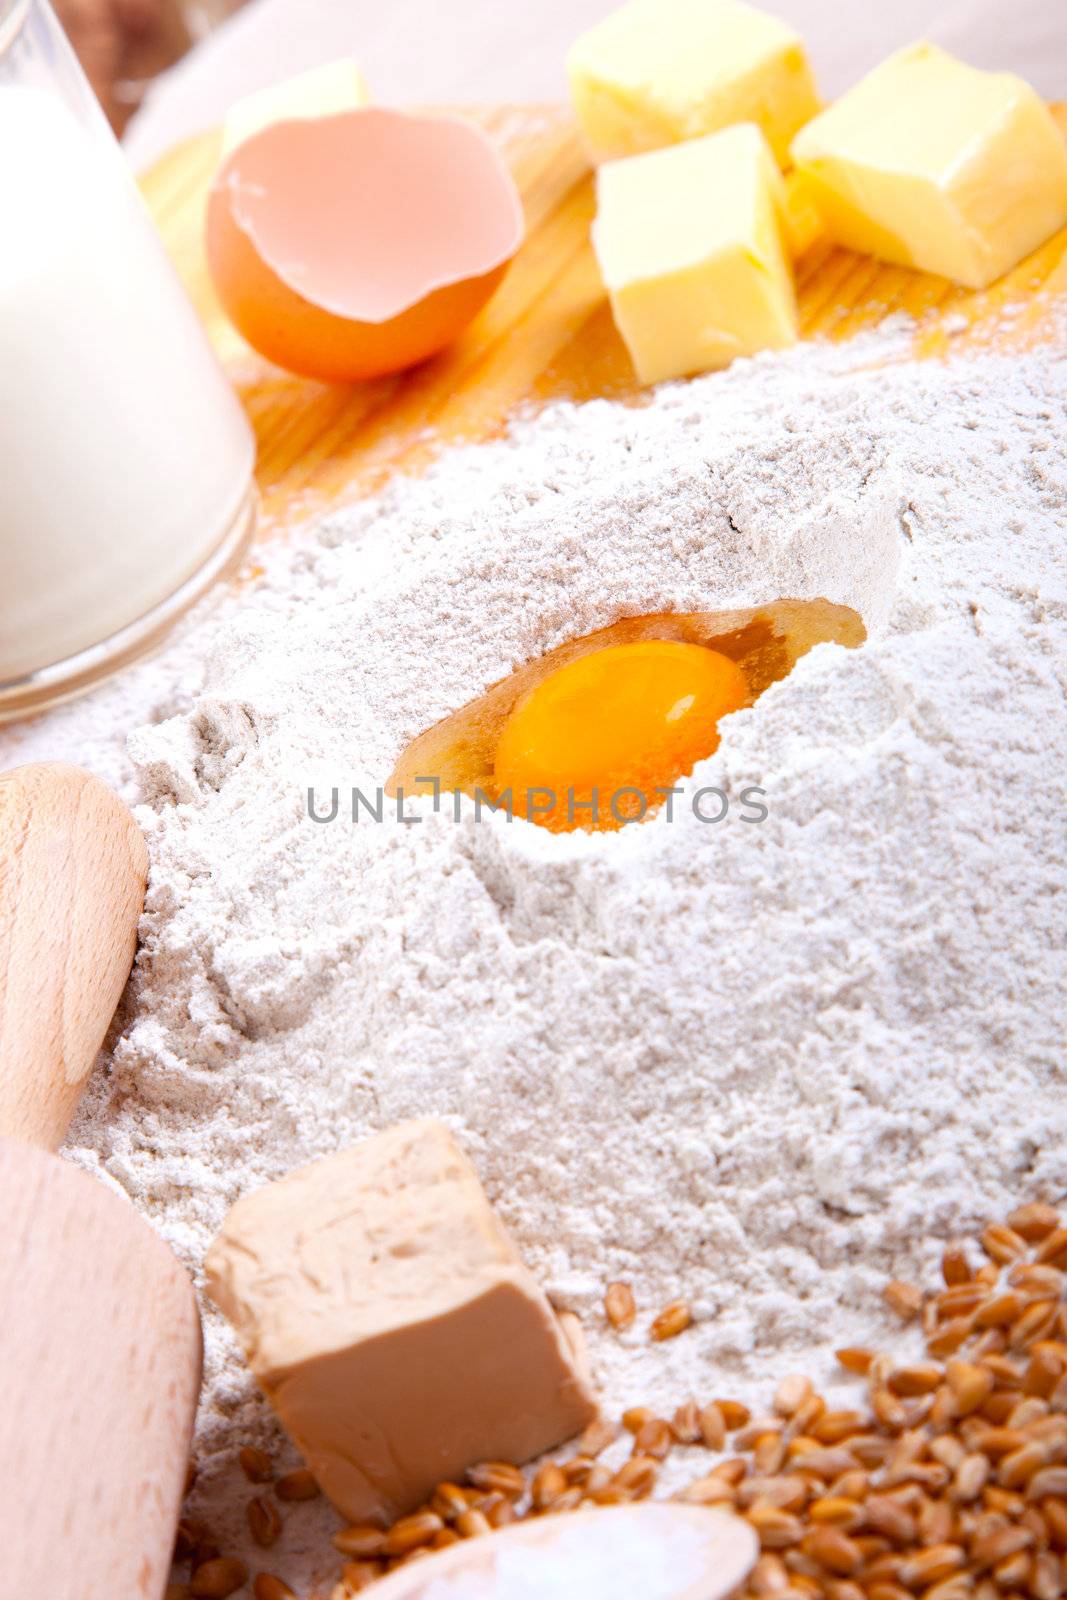 flour and eggs, butter, ingredients for baking. by motorolka